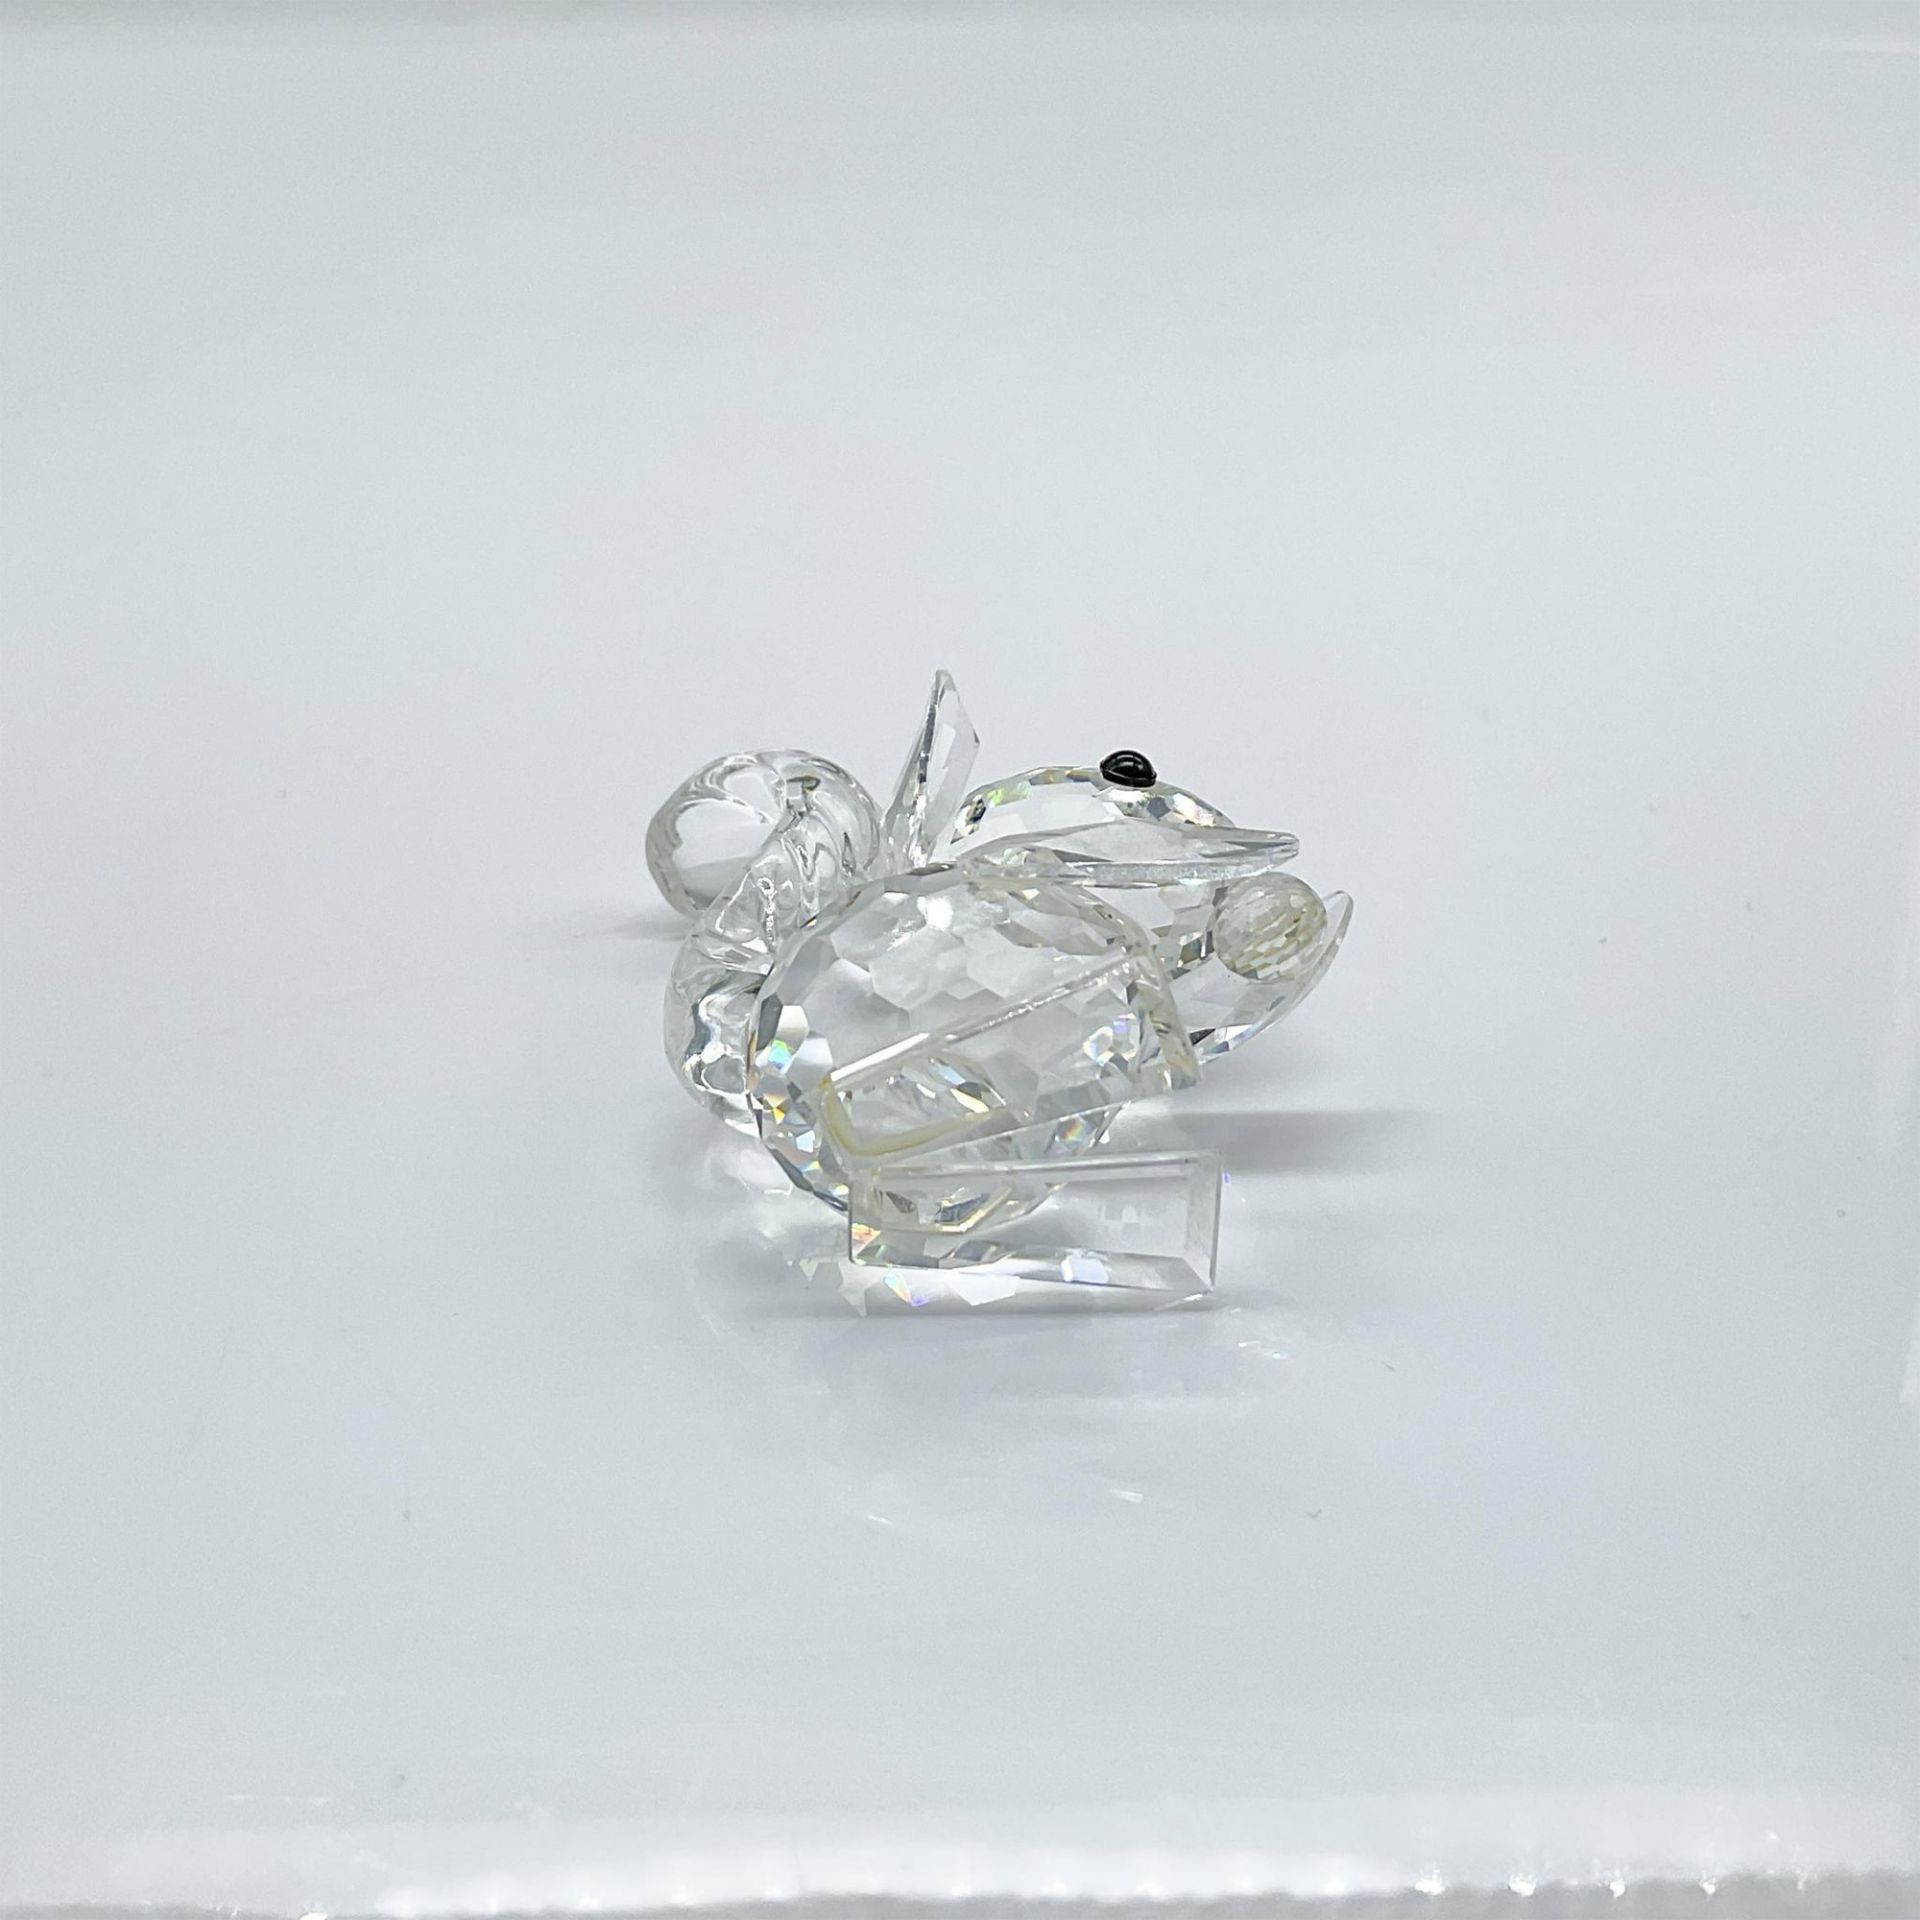 Swarovski Silver Crystal Figurine, Squirrel With Long Ears - Image 4 of 4